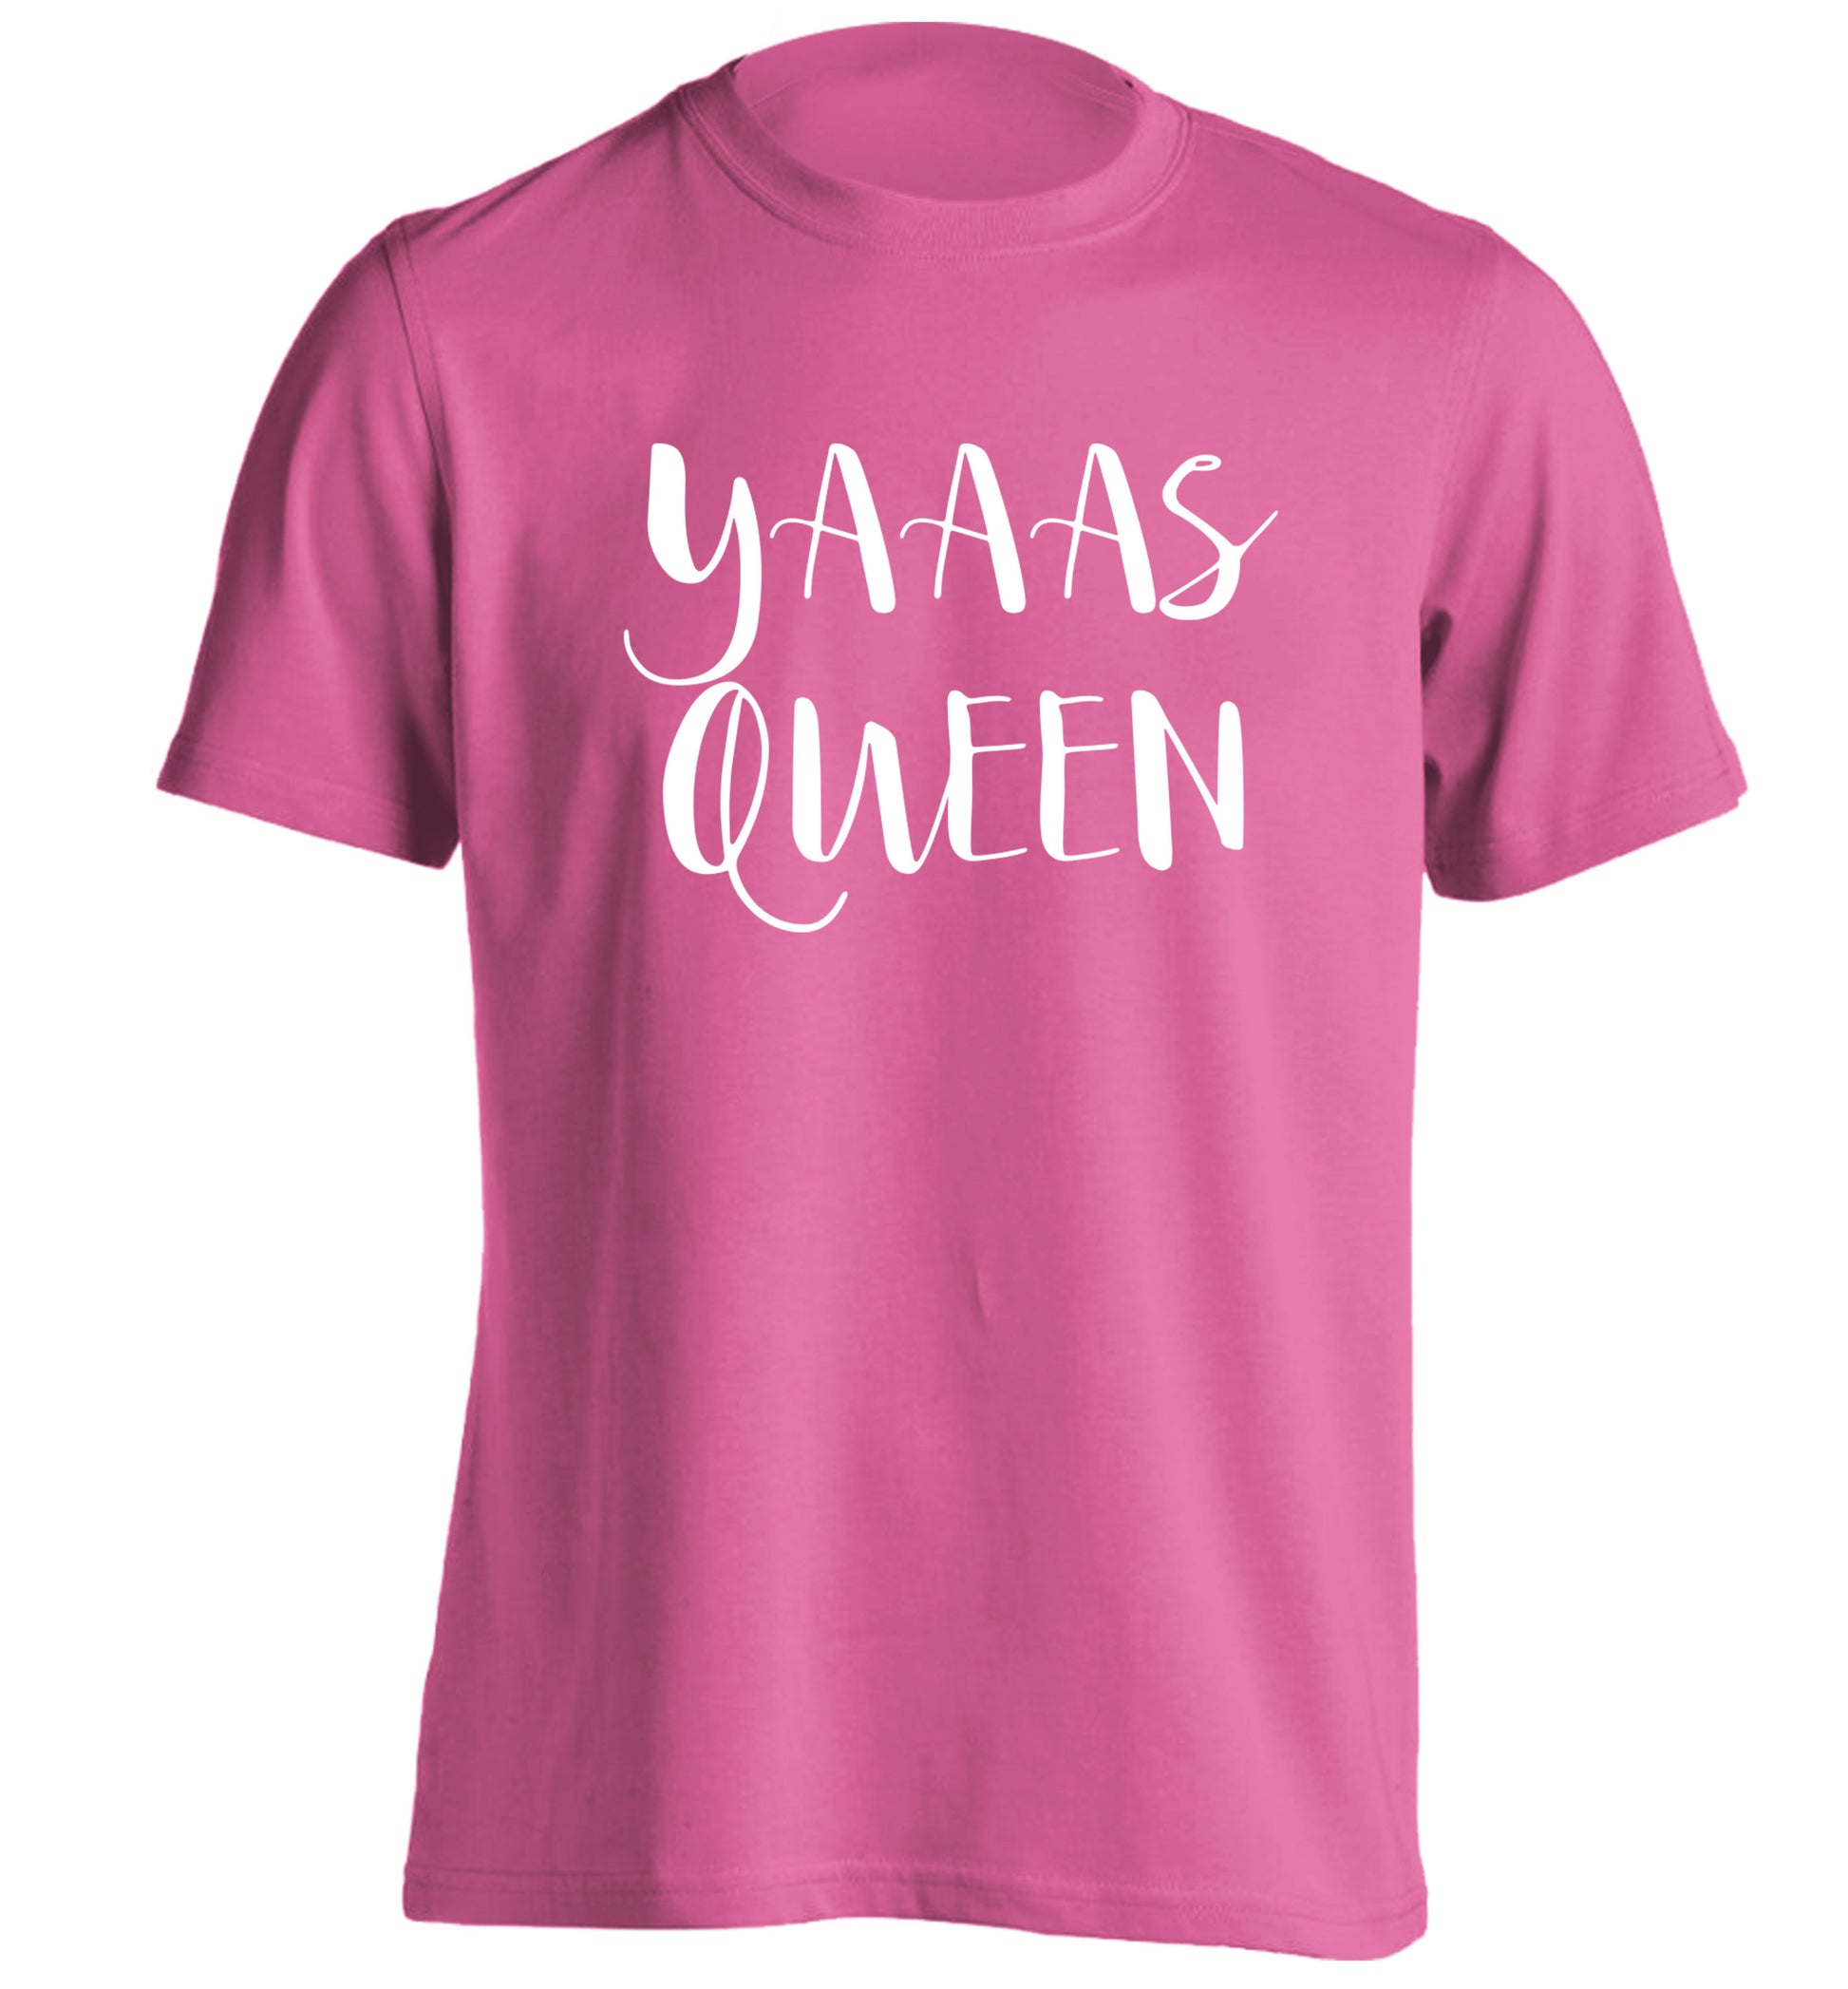 Yas Queen adults unisex pink Tshirt 2XL